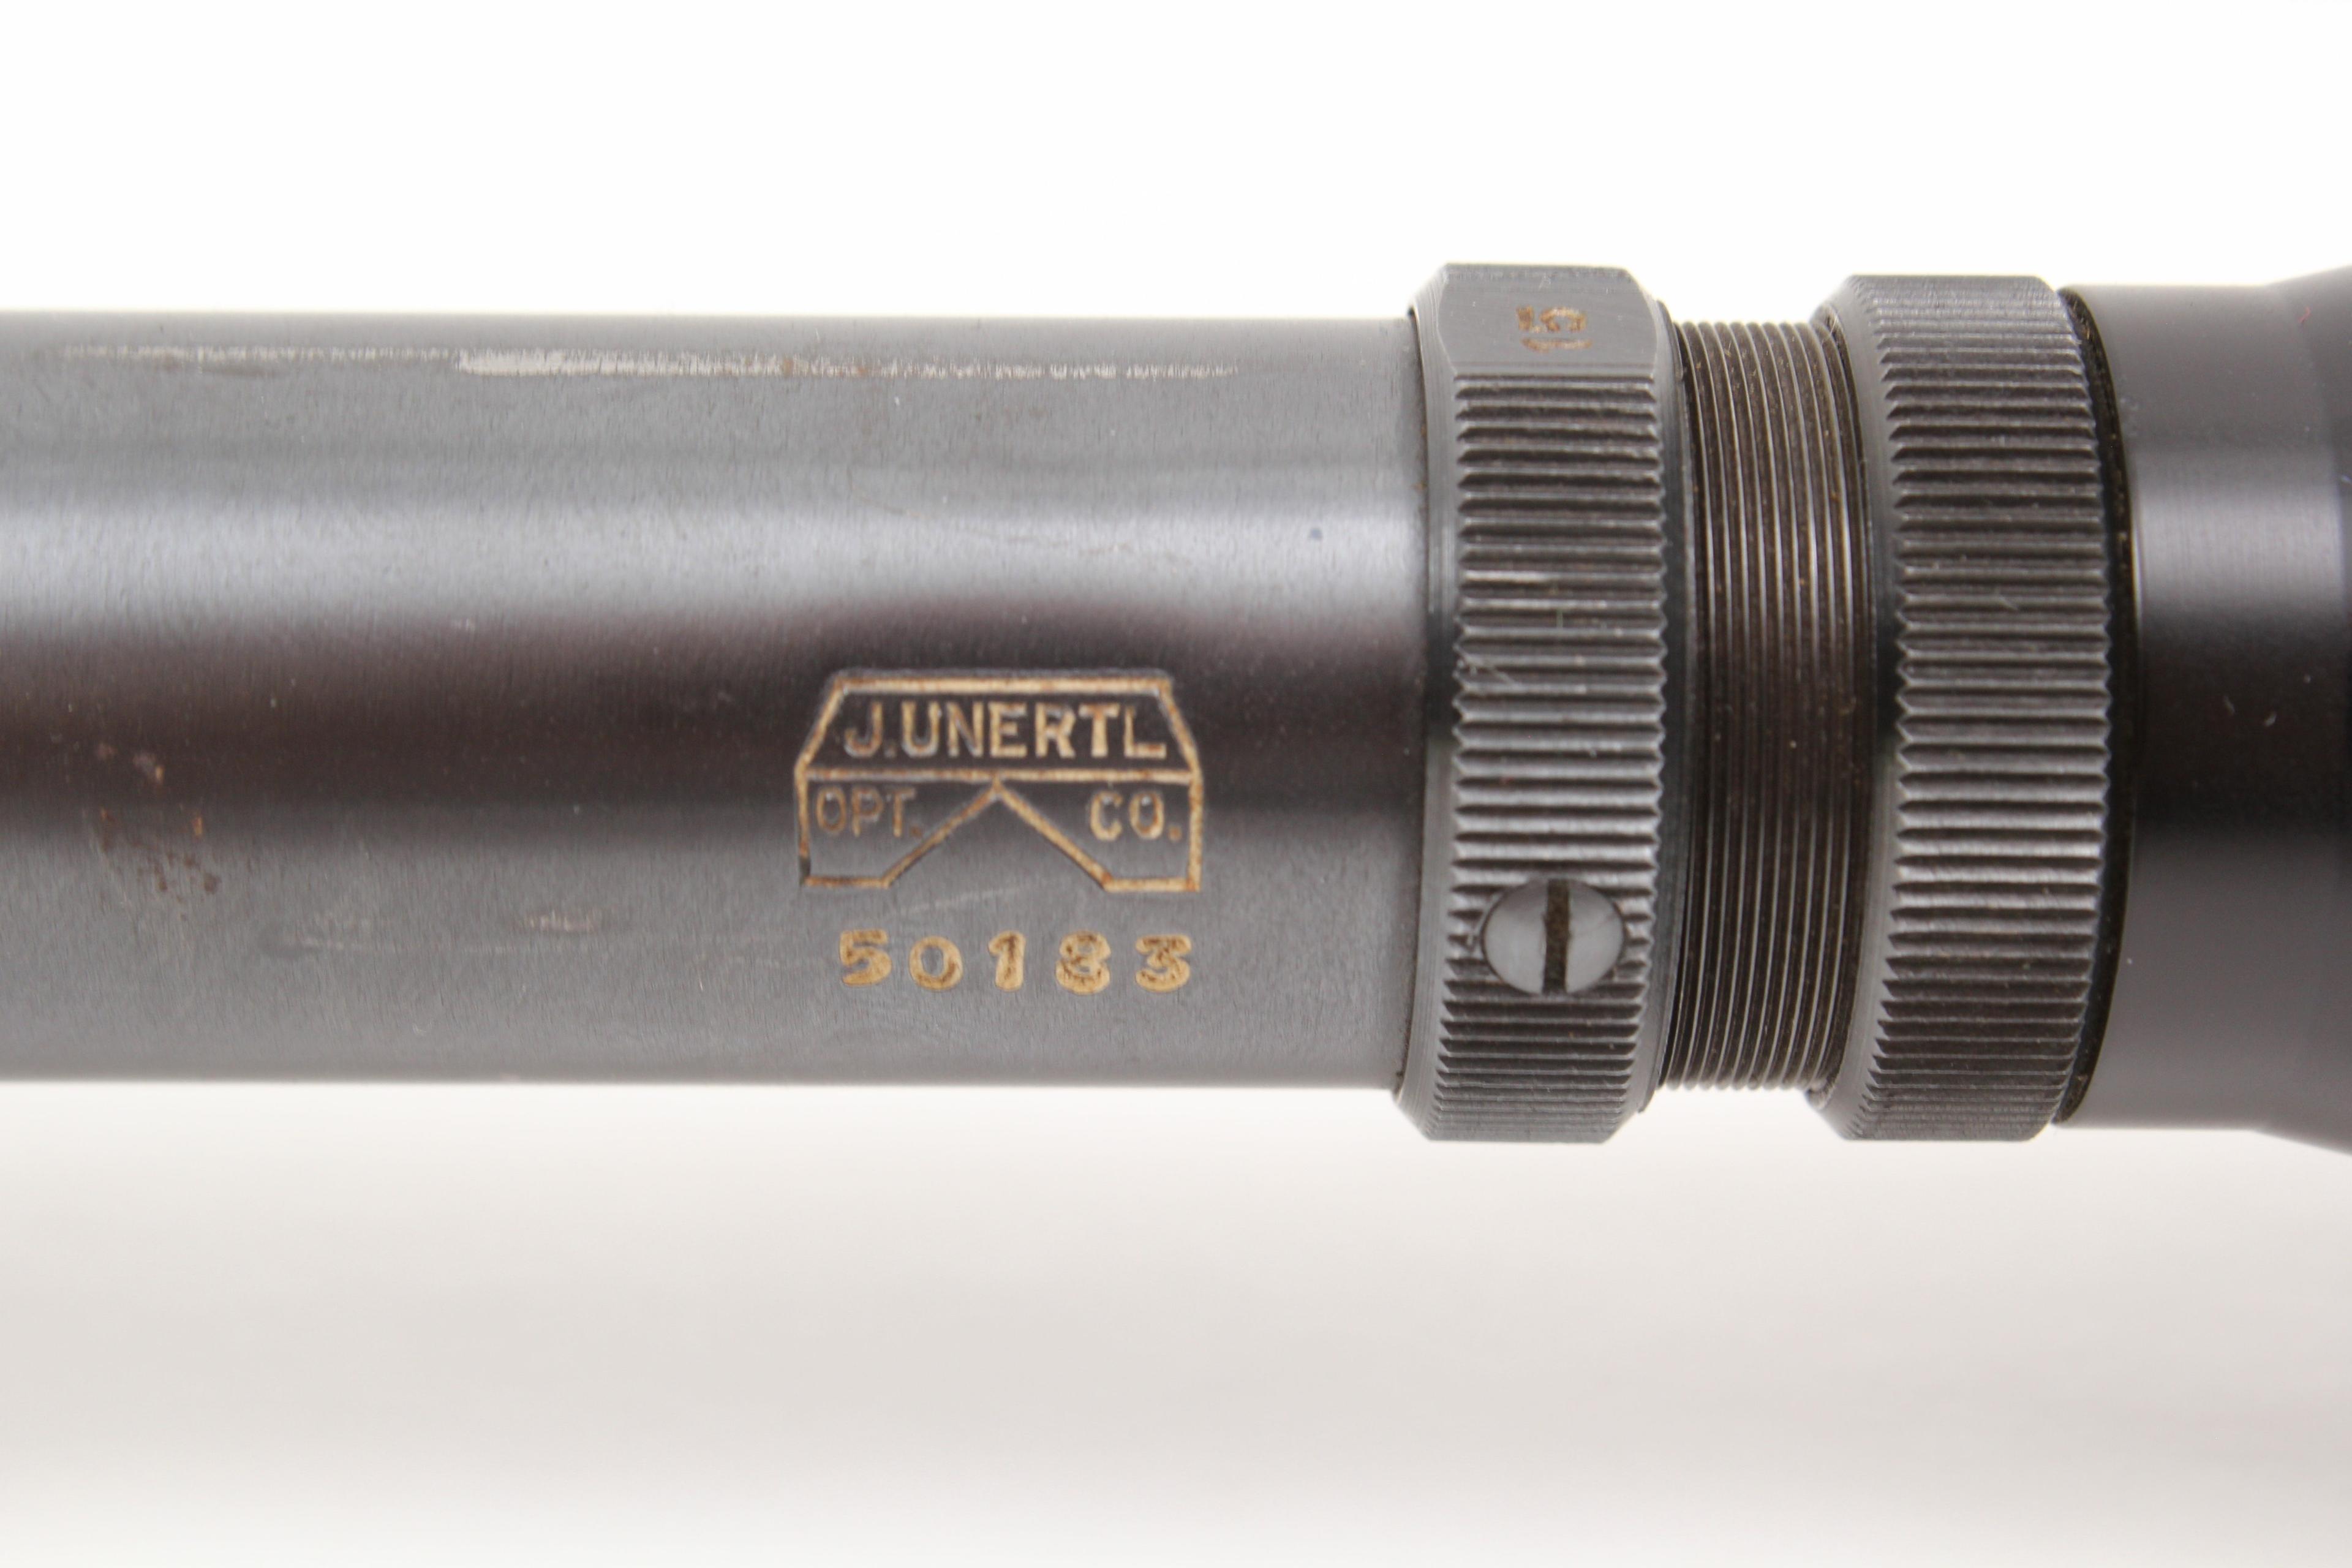 J. Unertl 1" tube 15x scope with aluminum mounts and steel lens covers